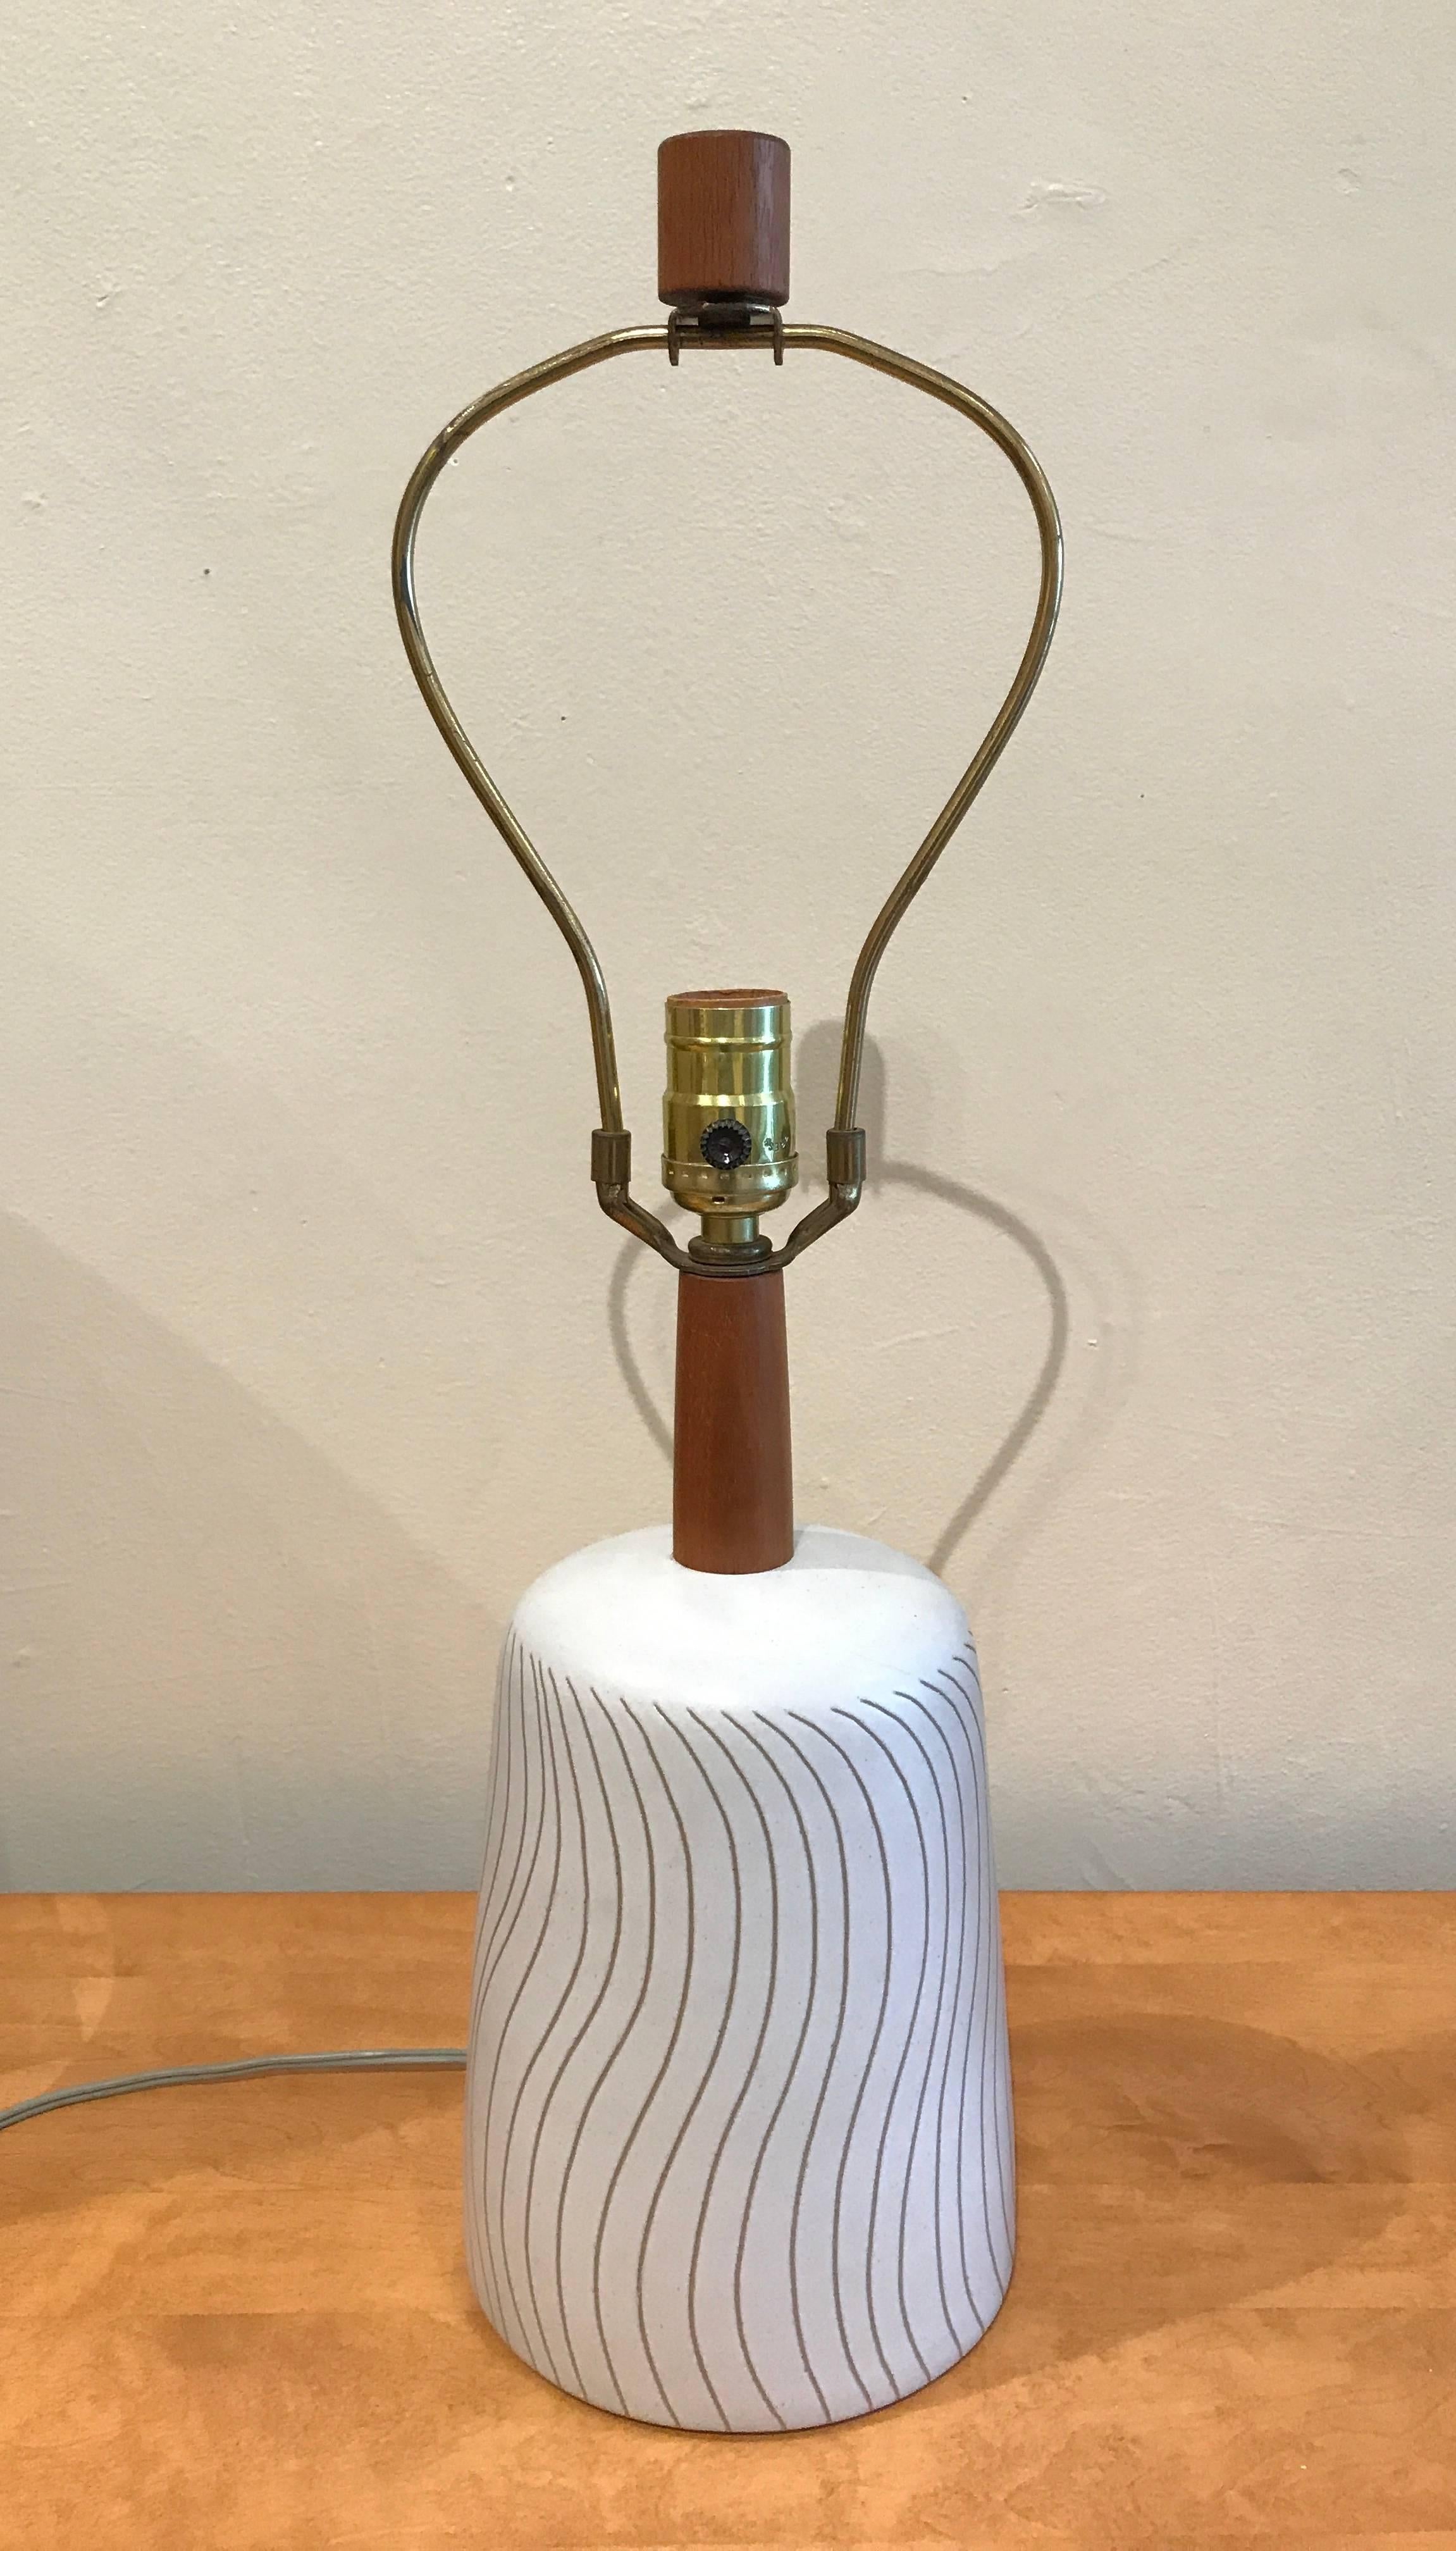 Small ceramic table lamp designed by Gordon and Jane Martz for their company Marshall Studios, circa late 1950s-early 1960s. Having a off-white glaze with brown incising wave patterns from the underlining clay body color, the finial and neck stem